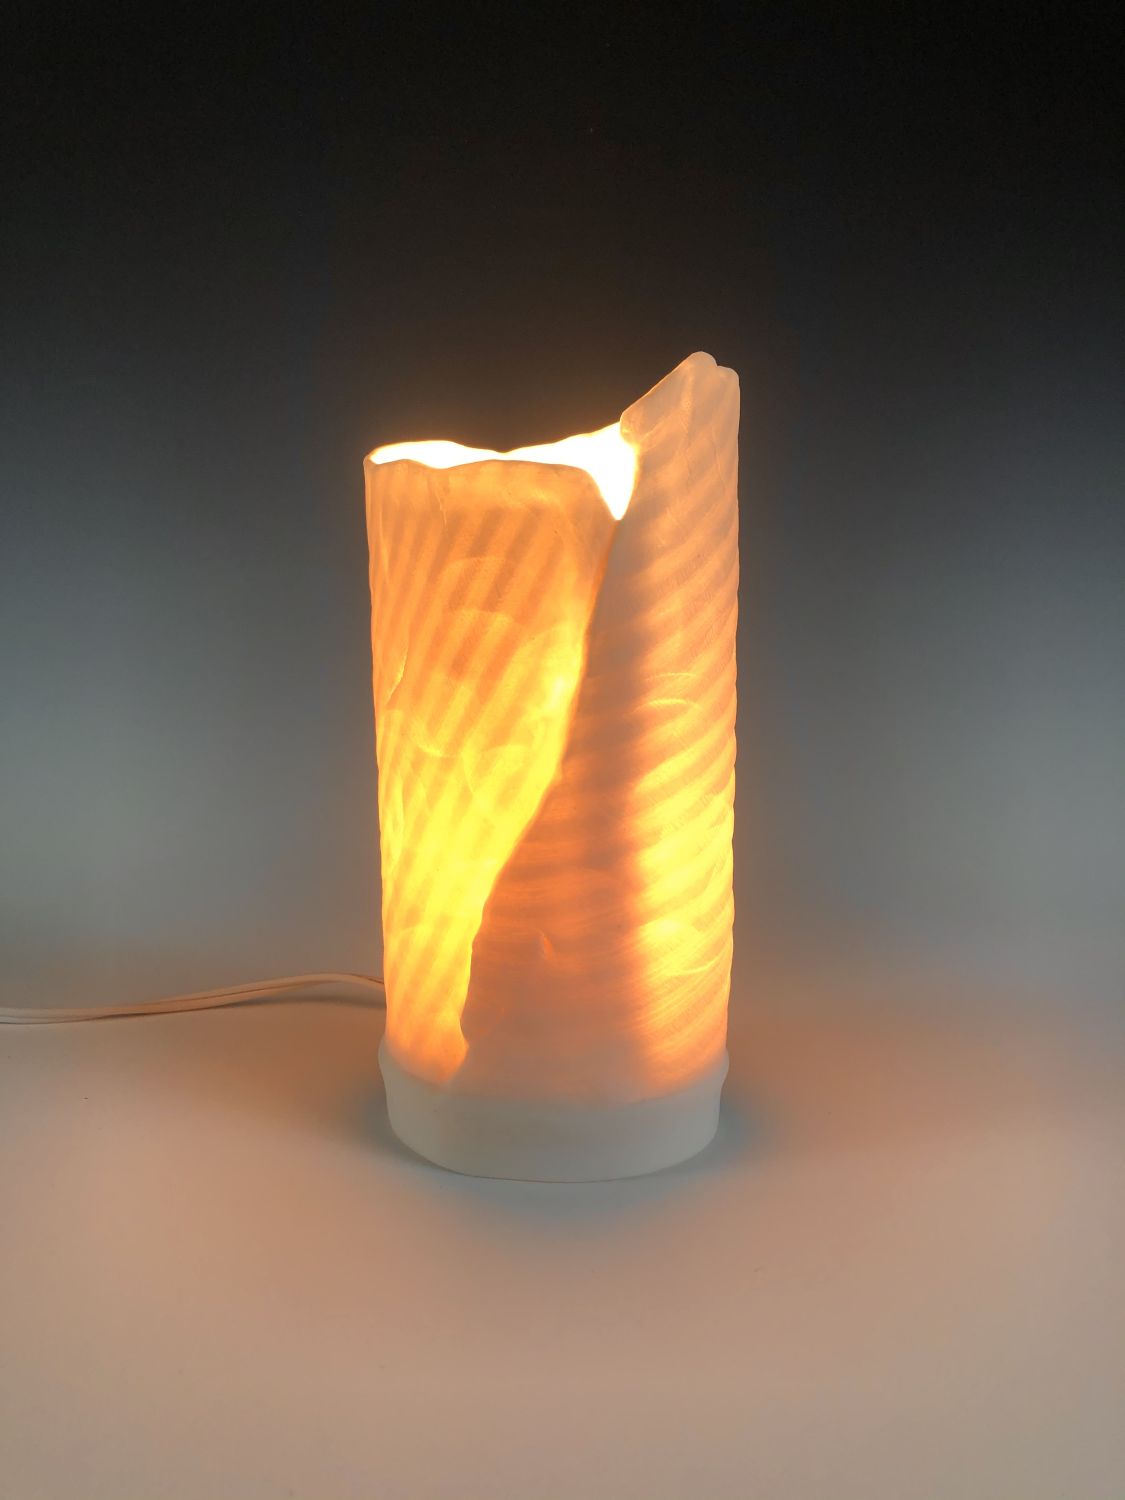 Silvana Michetti: Small Porcelain Lamp titled “Solace 4” Product Image 1 of 5